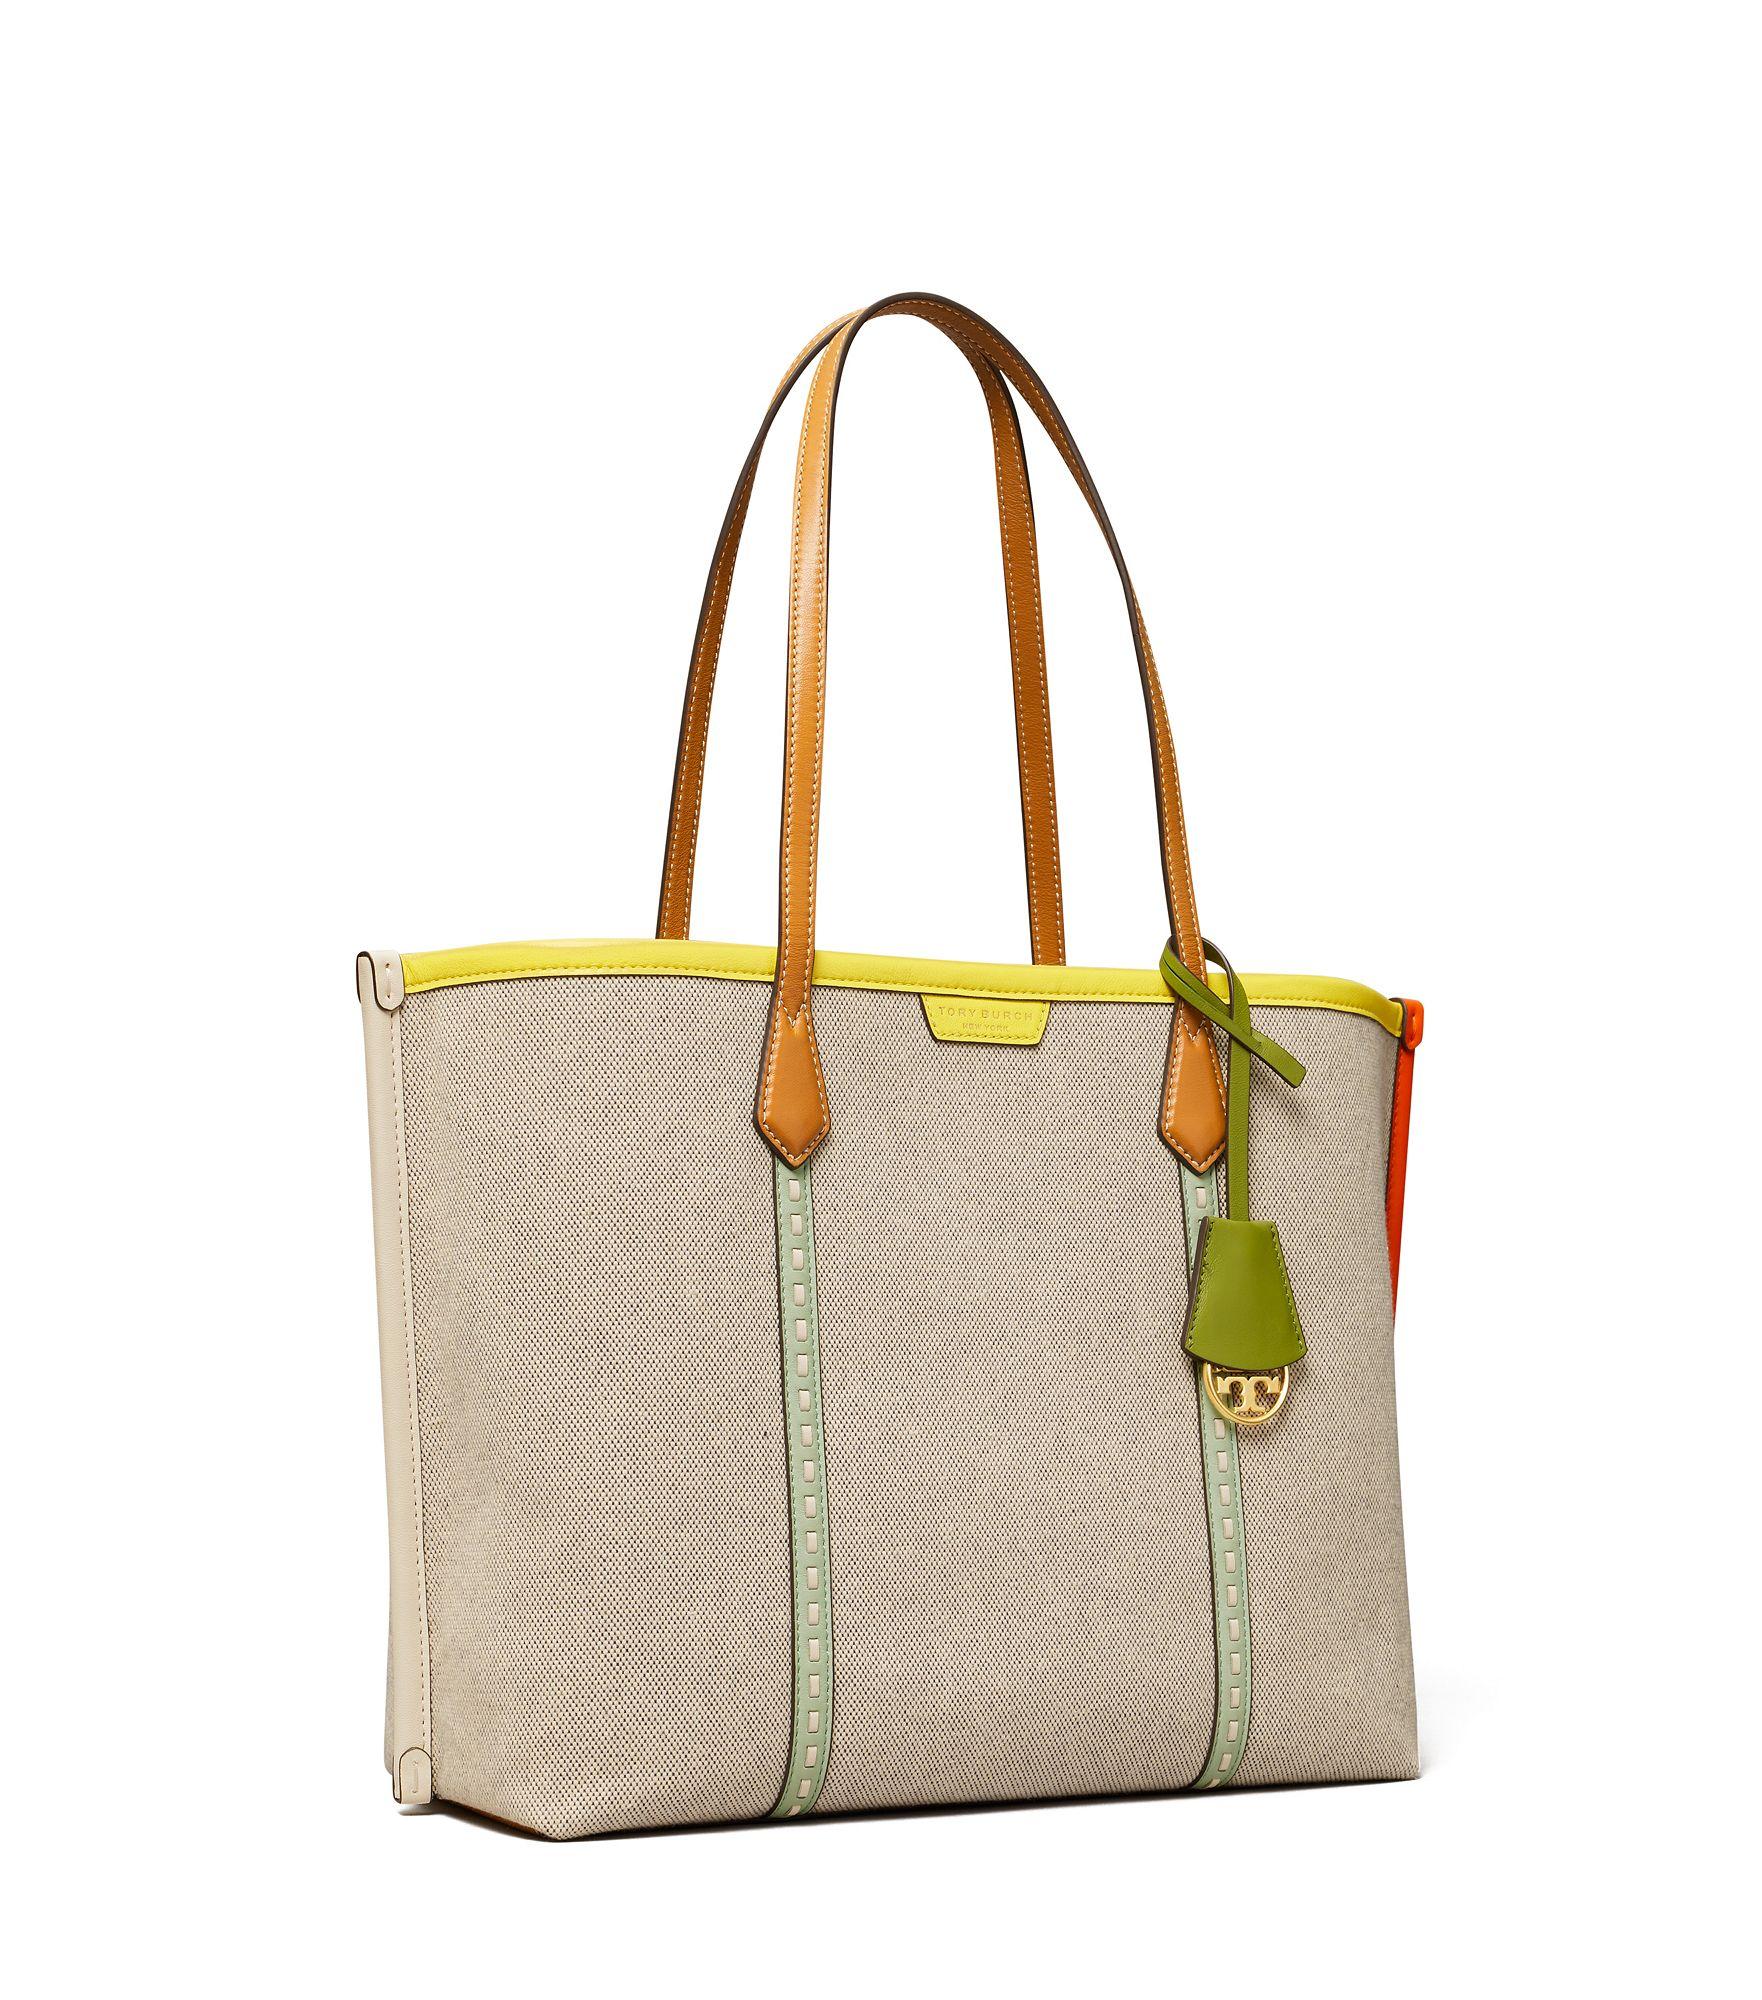 Totes bags Tory Burch - Perry canvas tote - 64475254